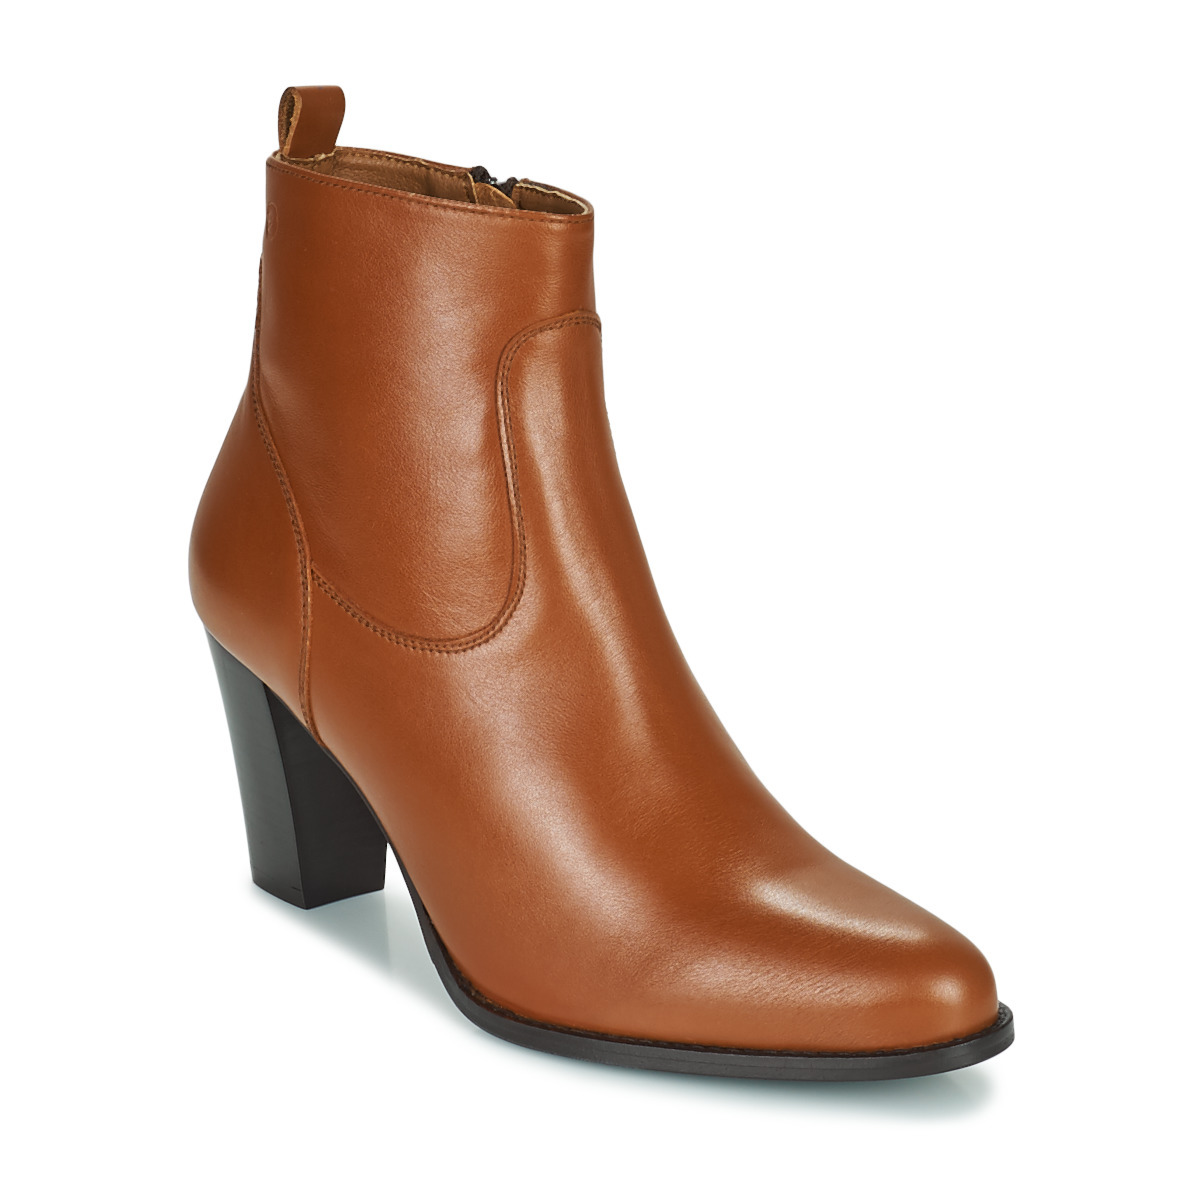 Spartoo Brown Ankle Boots Betty London GOOFASH